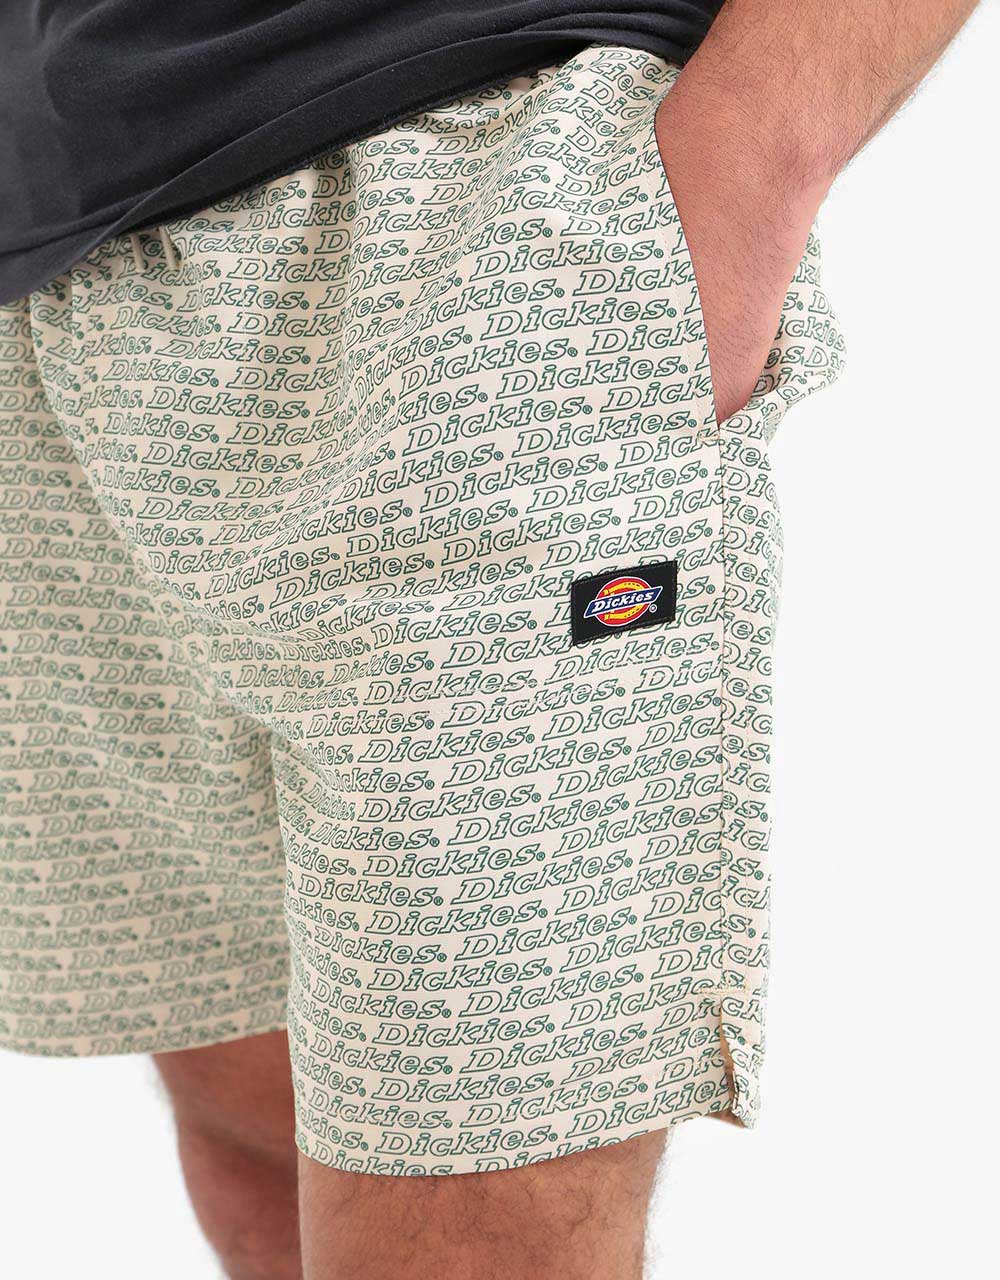 Dickies Cave Point Short - Light Taupe